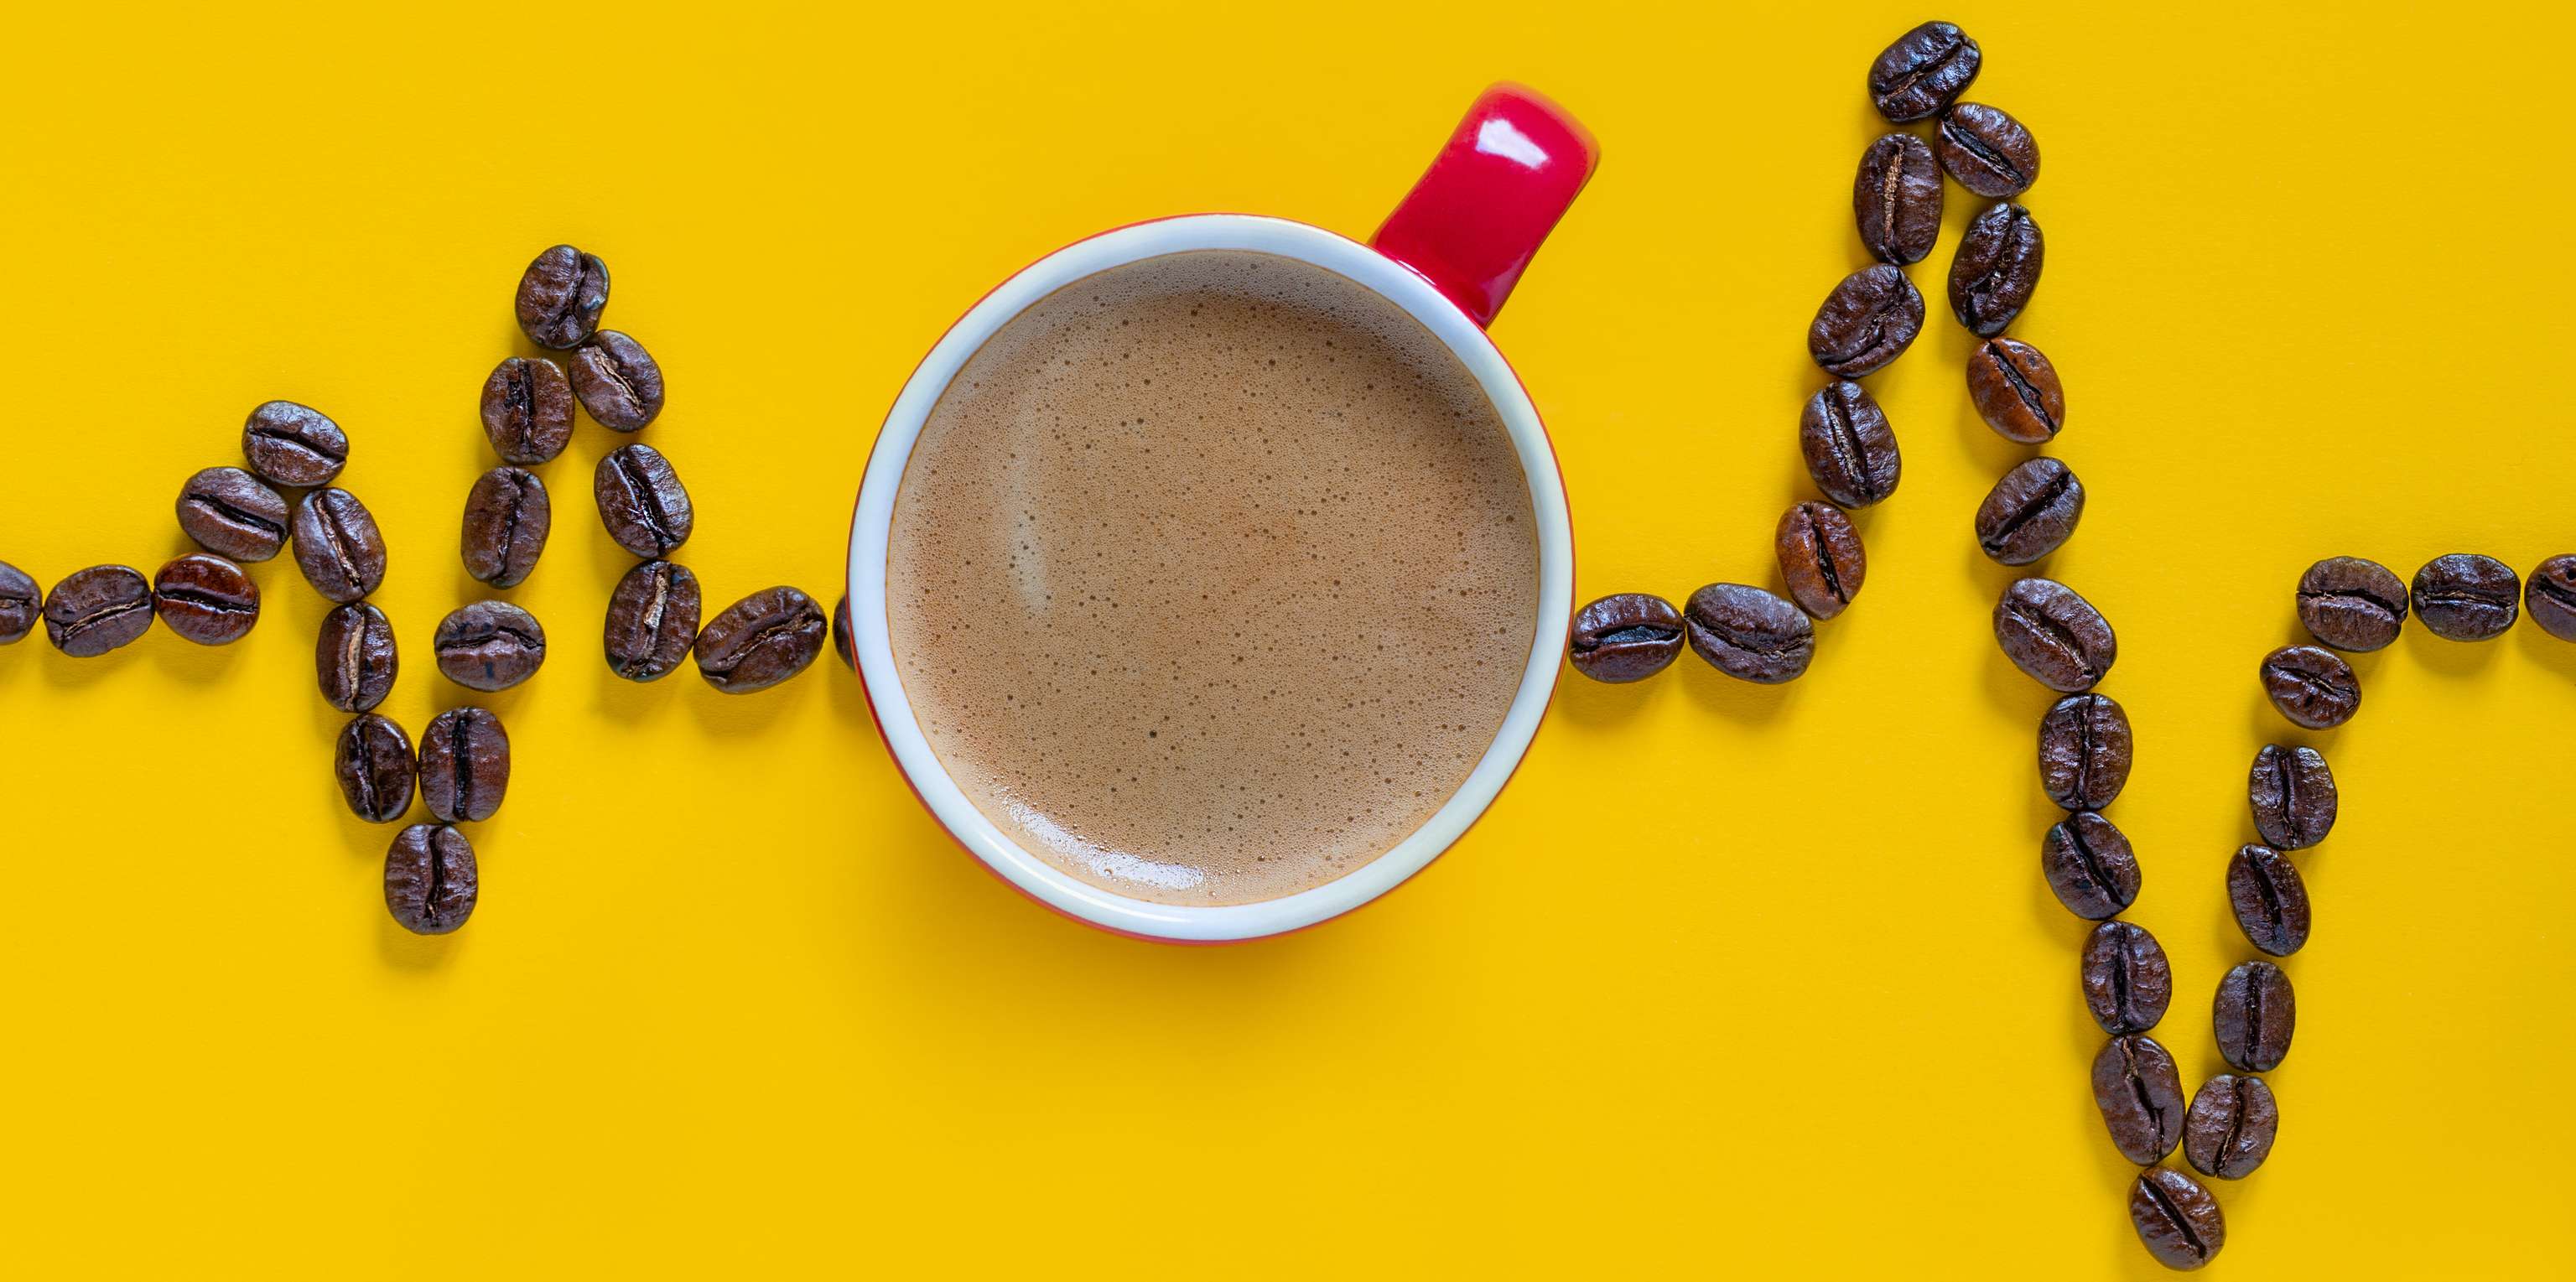 Does the stimulant coffee protect against prostate cancer?